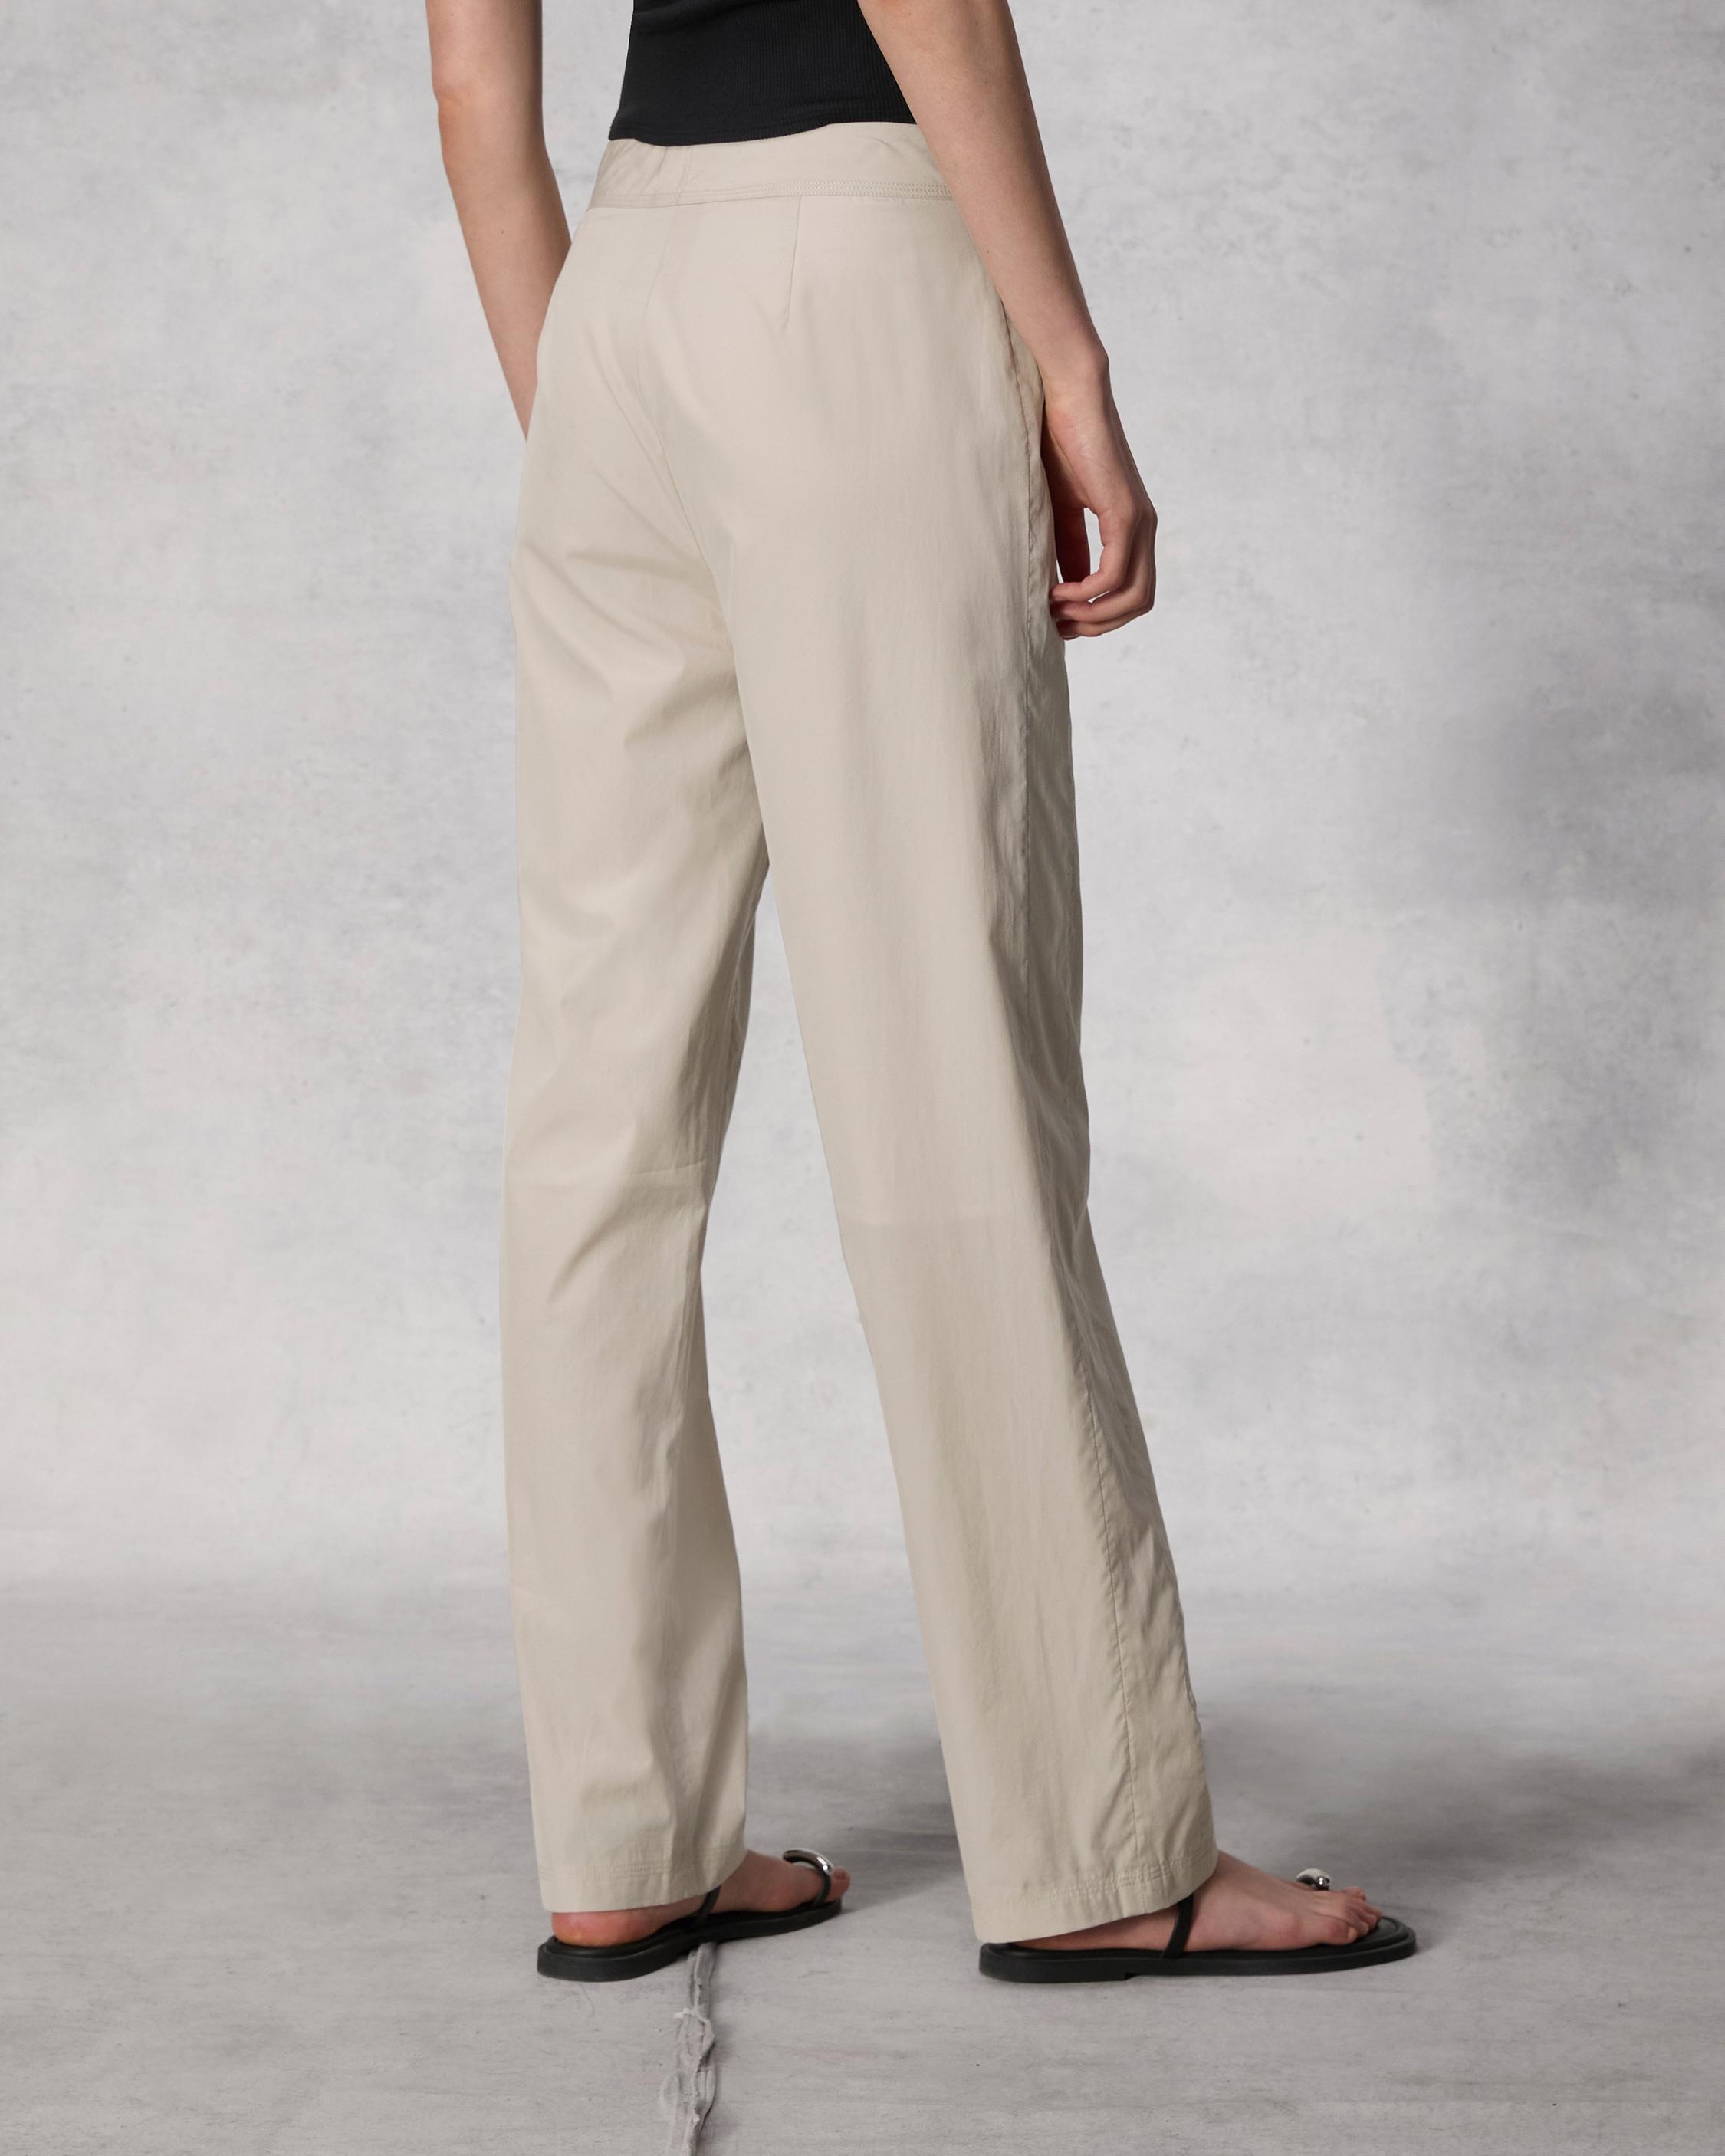 Fern Cotton Poplin Pant
Relaxed Fit - 4